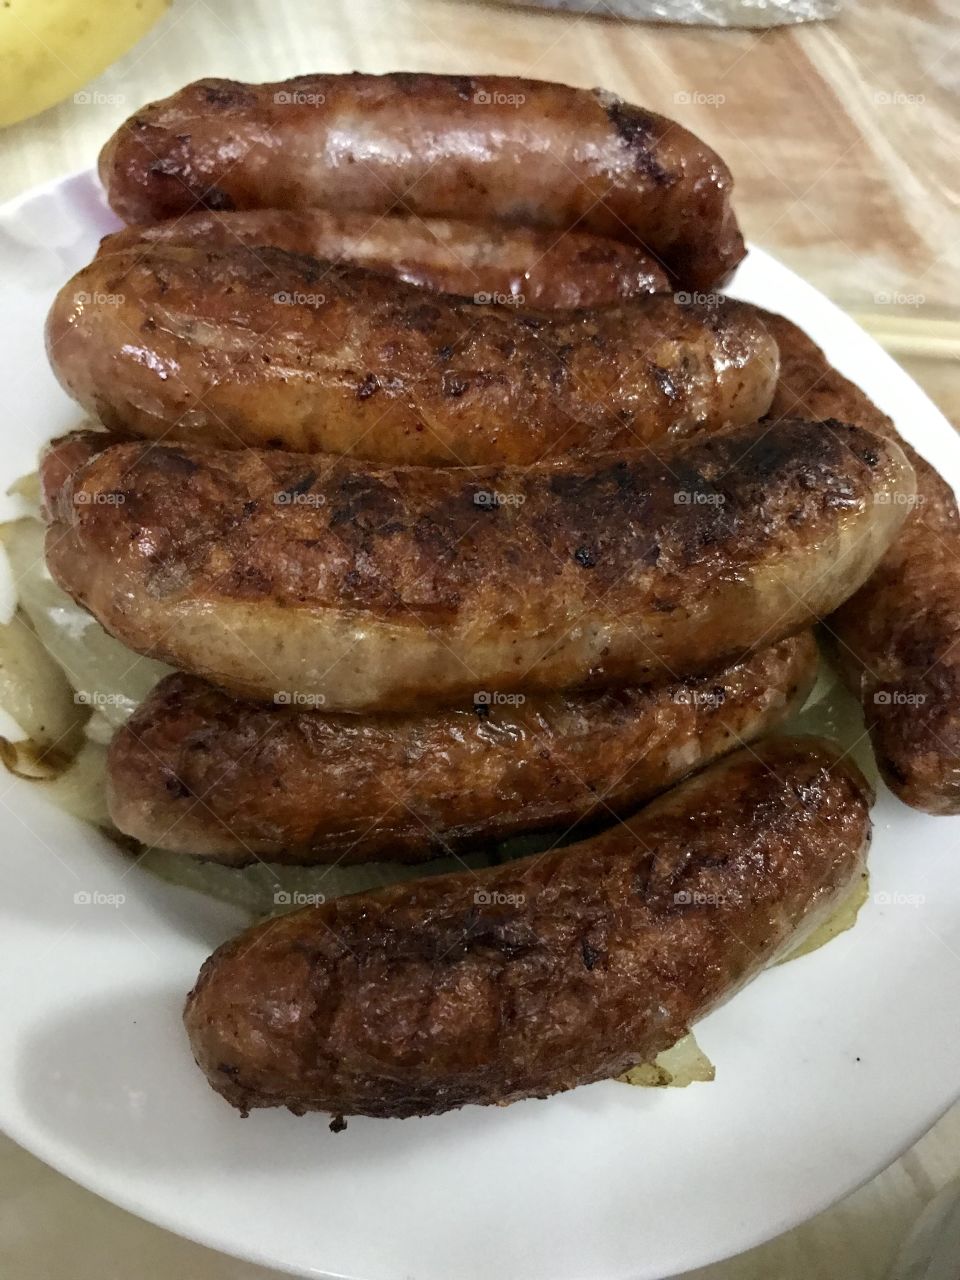 Grilled pan fried brown sausages on a plate